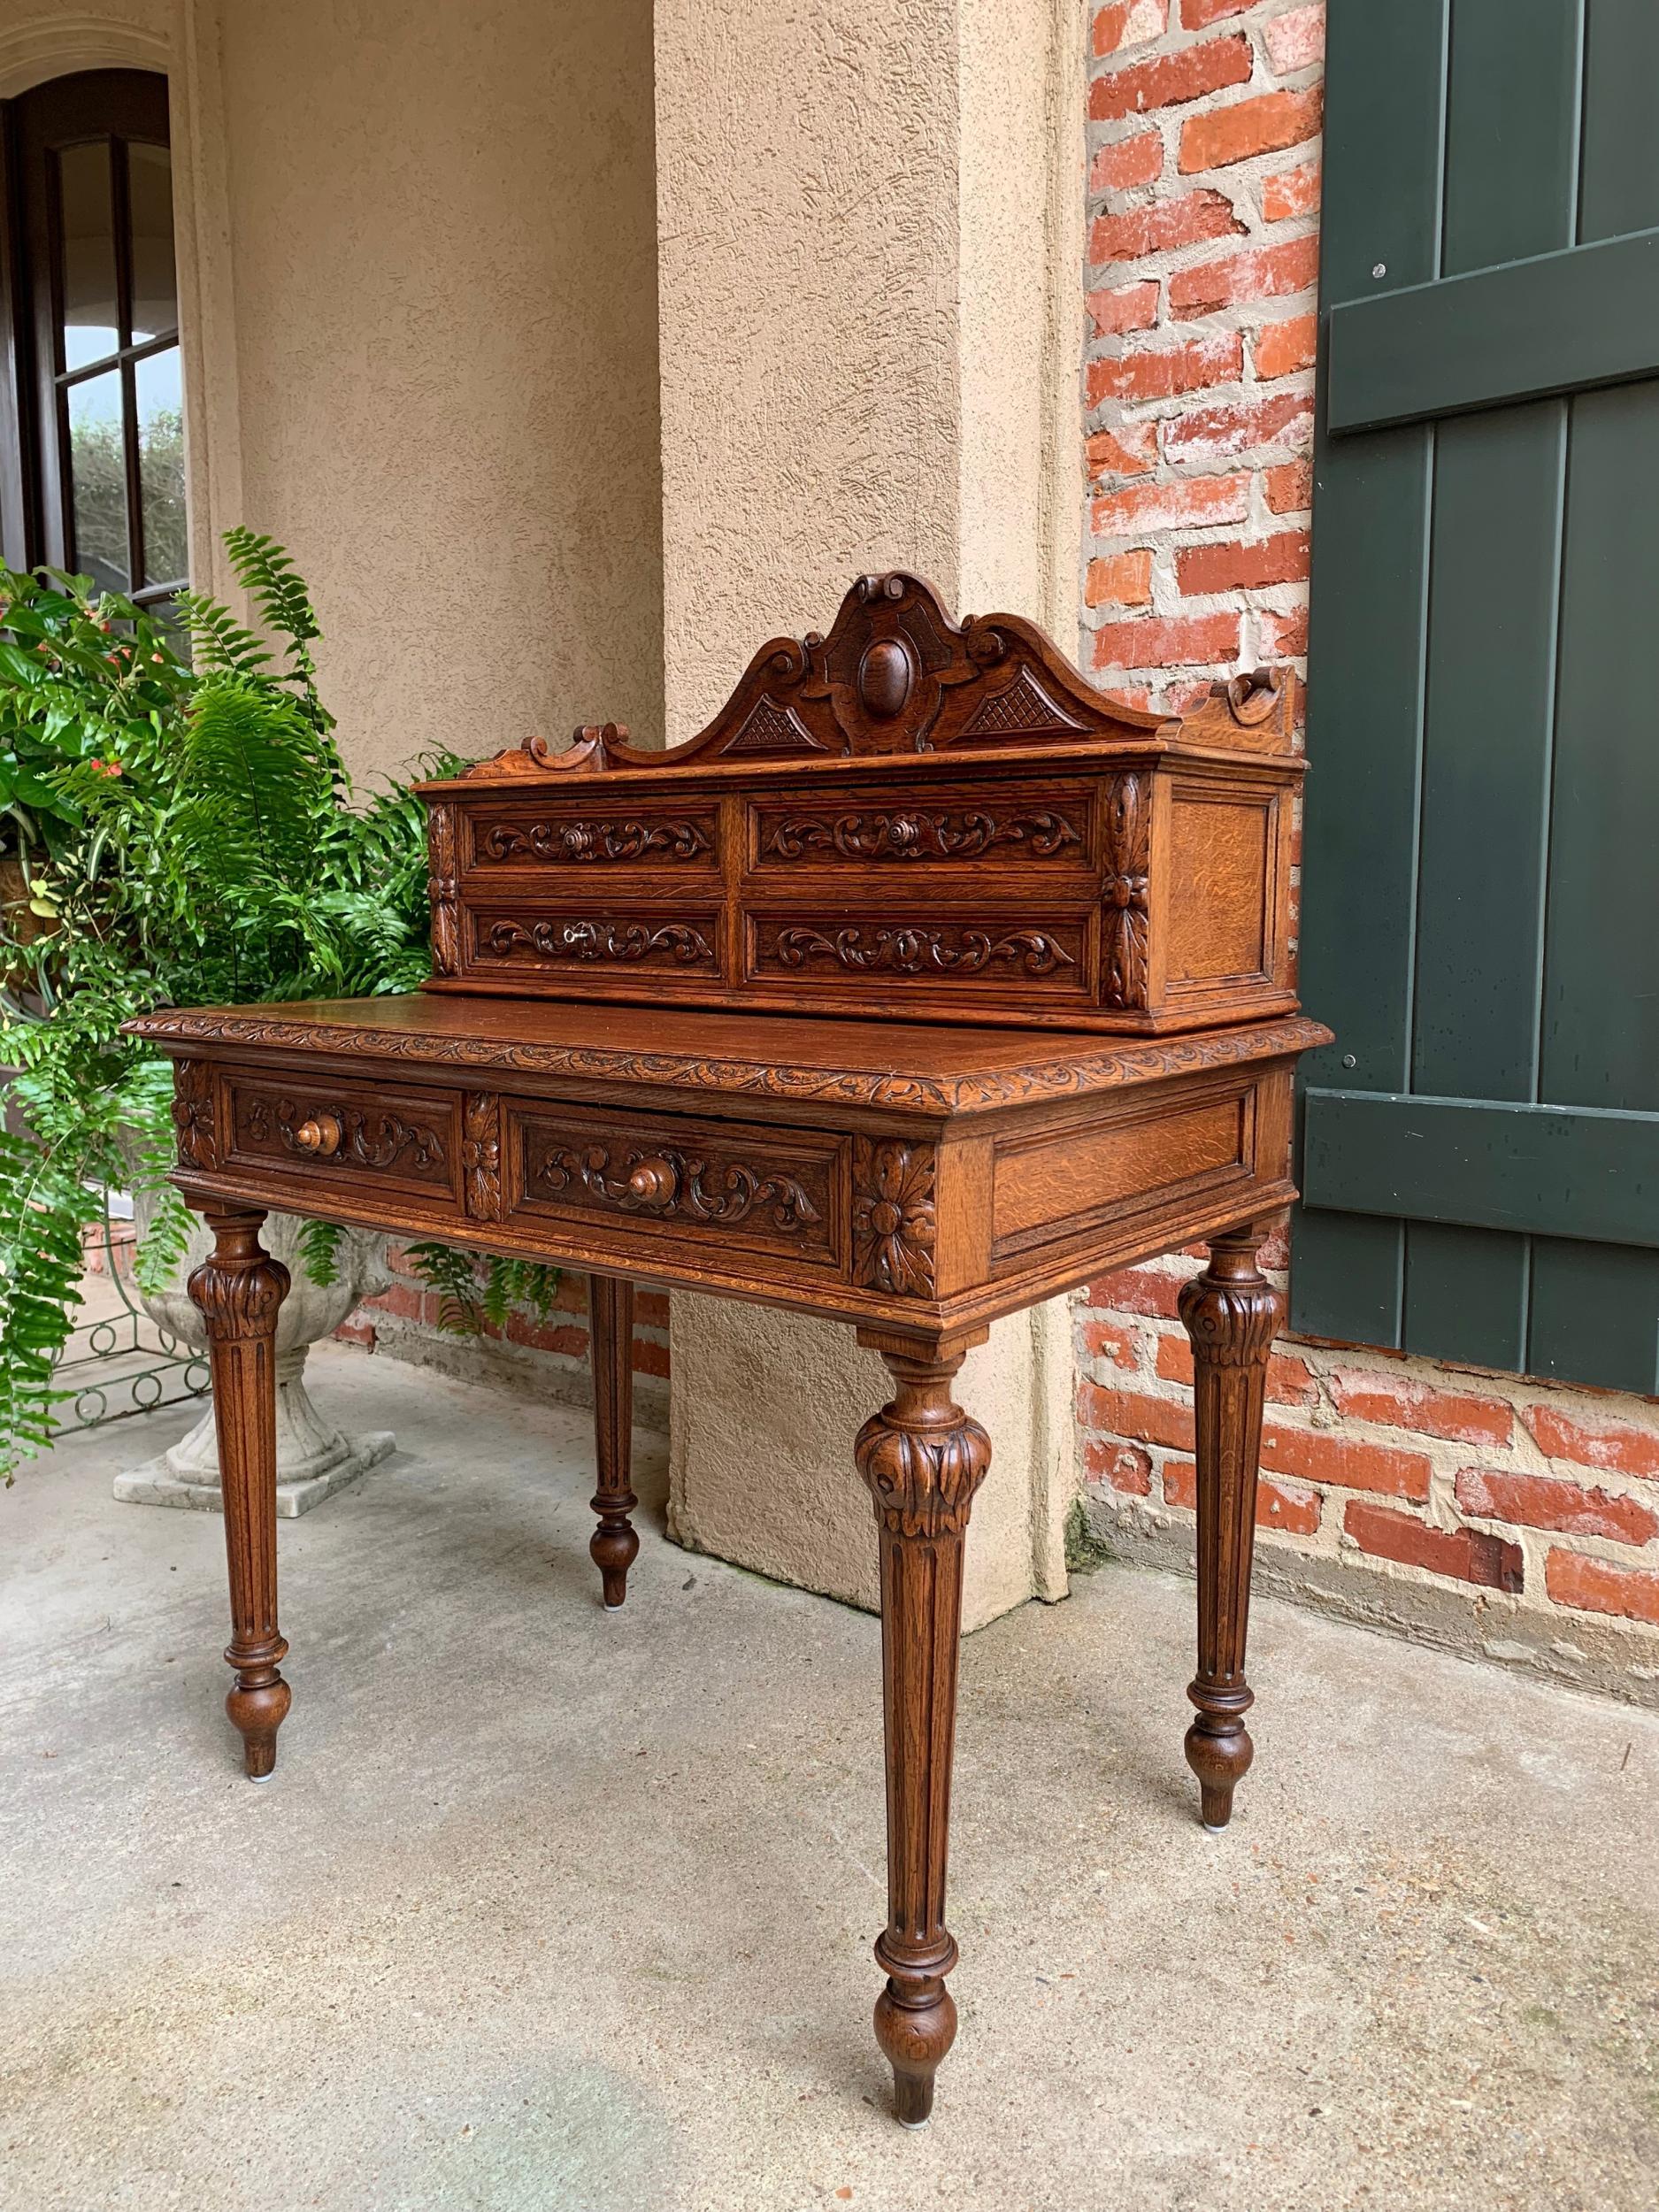 19th century Petite French carved oak secretary writing desk Louis XVI style

~Direct from France~
~Beautiful antique French carved oak secretary with fabulous detailing throughout~
~Large upper crown features center dimensional carved cartouche and